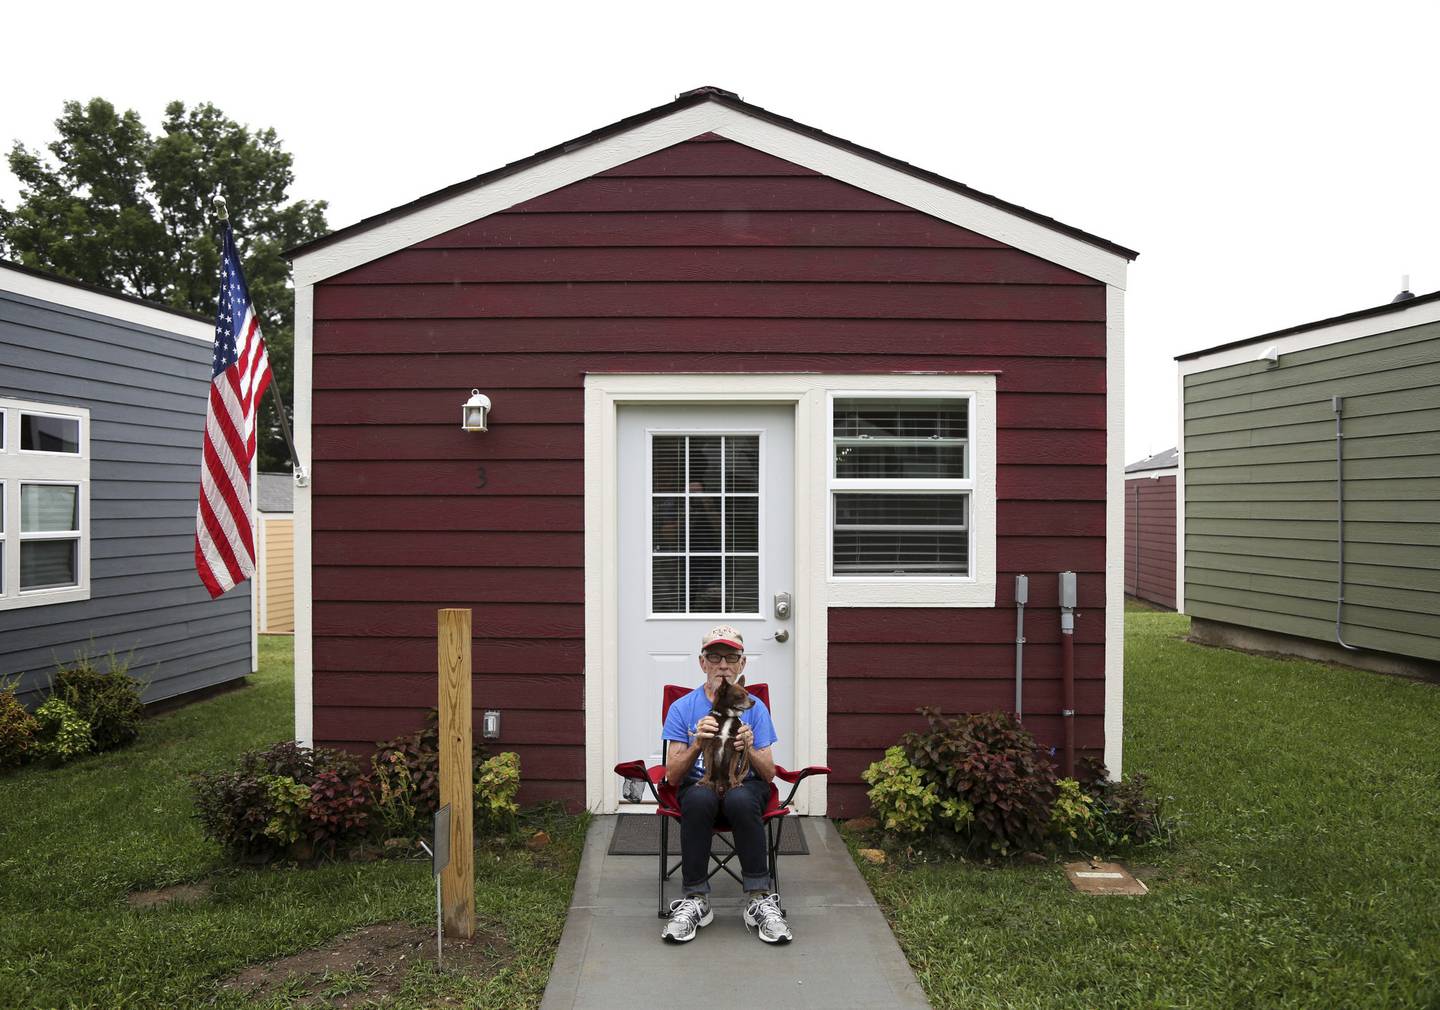 Leo Morris sits with his dog, Petey, in front his house in Kansas City, Missouri, in 2016. The project offers transitional housing to homeless veterans. Morris lost his house in a fire.